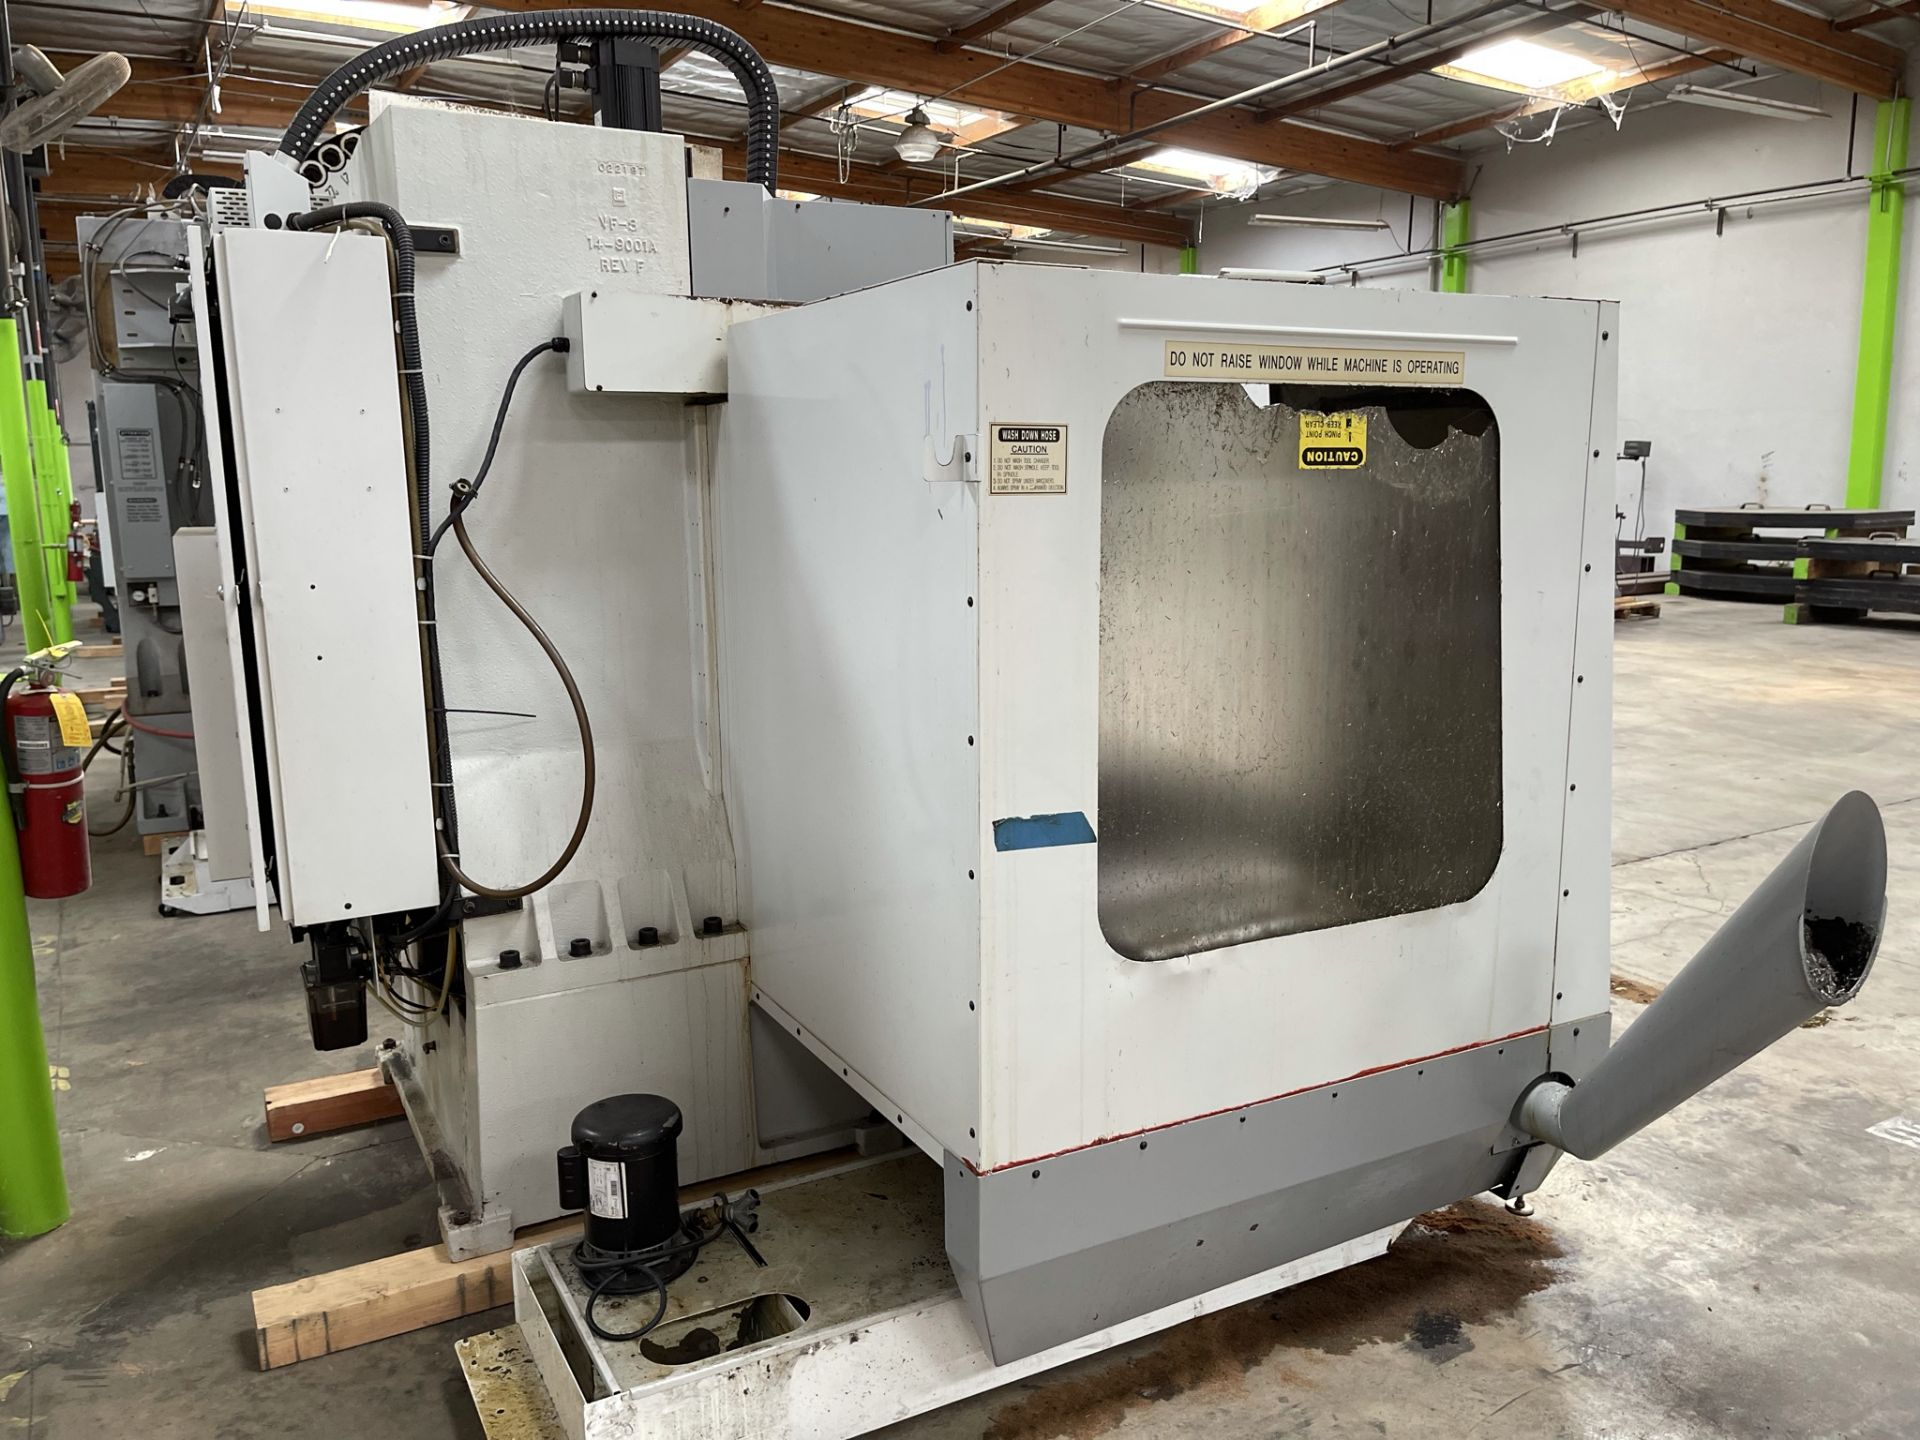 1997 HAAS VF-4 VERTICAL MACHINING CENTER, XYZ TRAVELS: 50" X 20" X 25" Z, 52" X 18" TABLE, 24 ATC, - Image 6 of 9